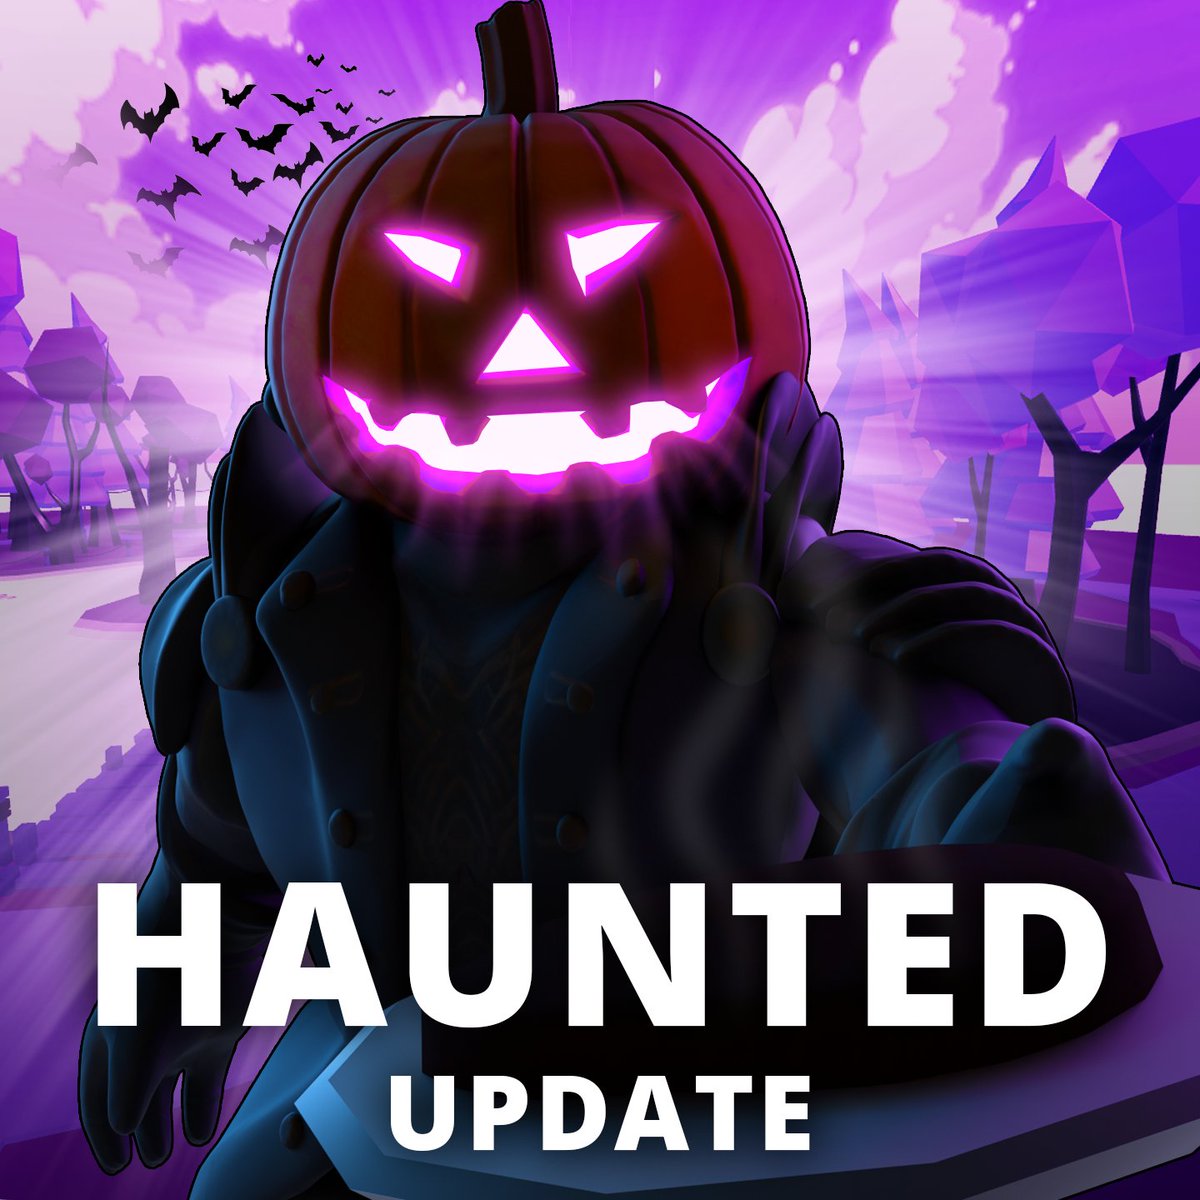 Big Games On Twitter My Restaurant Haunted Update Is Live For All Players Talk To The Headless Horseman At The Graveyard To Complete Tasks And Earn Limited Halloween Items More - headless horseman roblox item